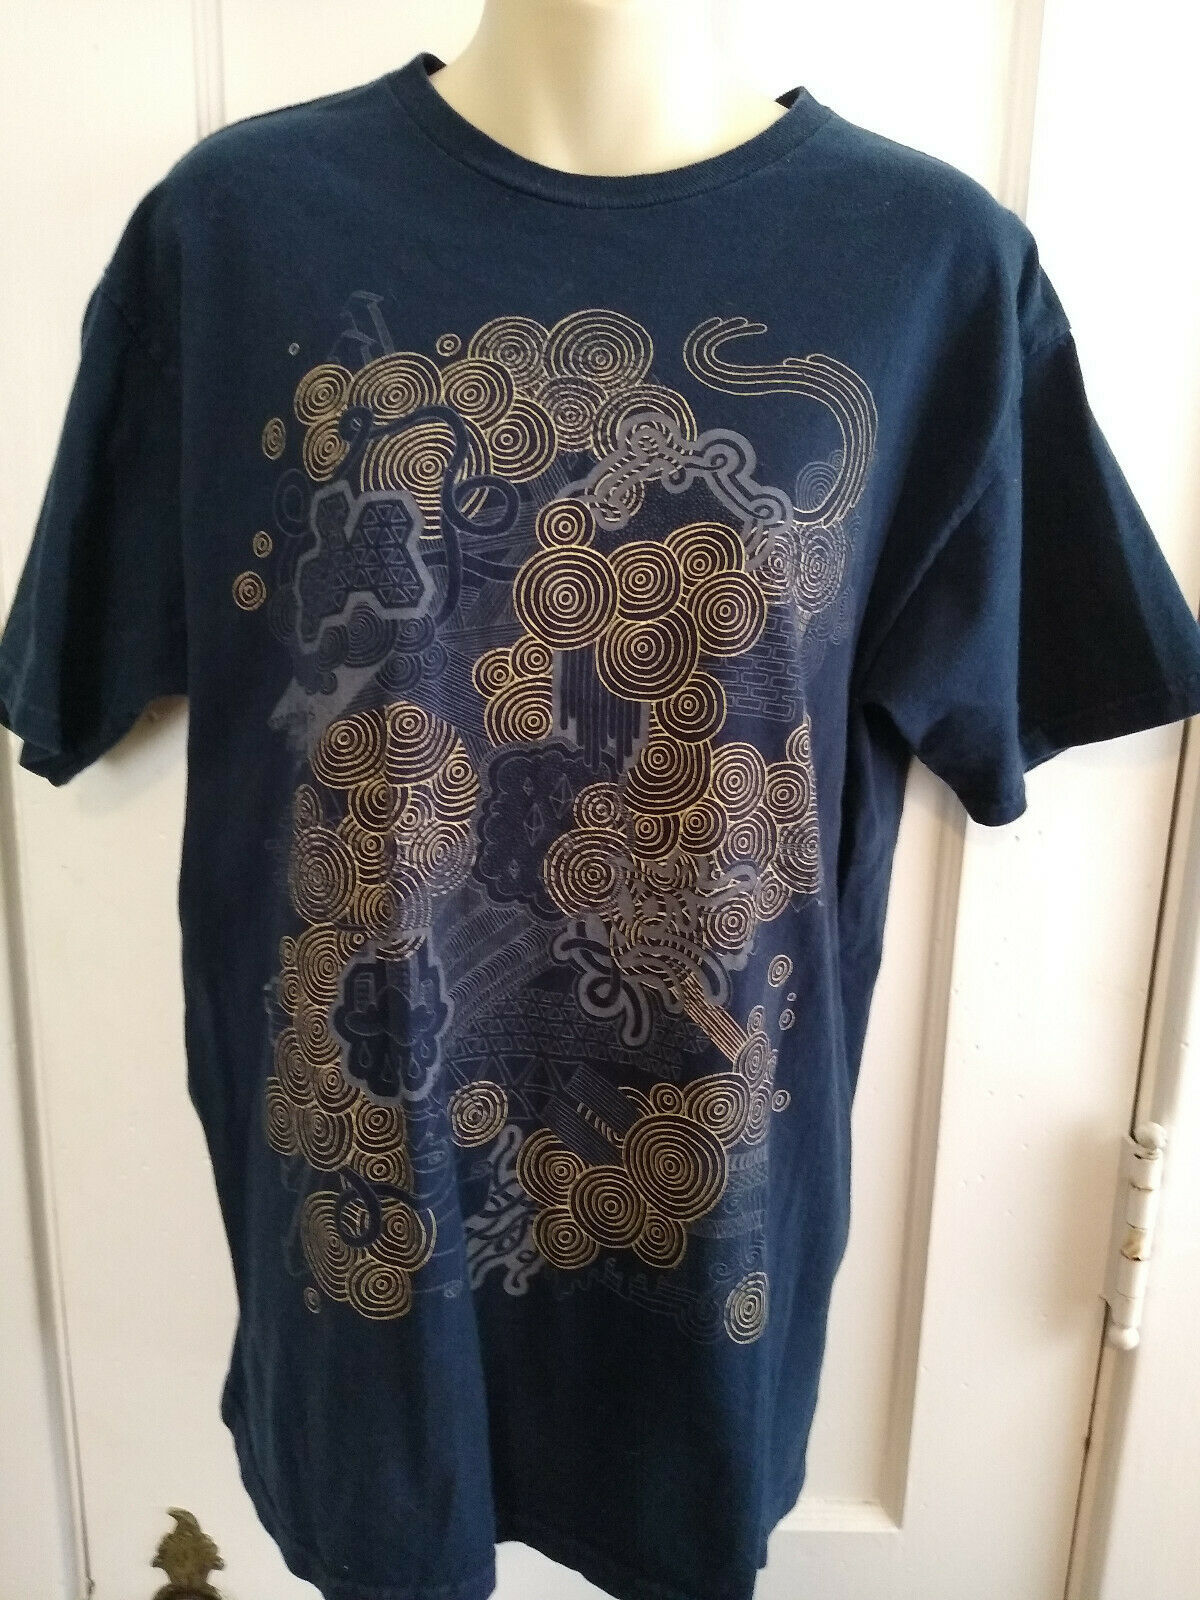 Primary image for Blue Geometric Spiritual t-shirt by Tee Fury size M 100% cotton 